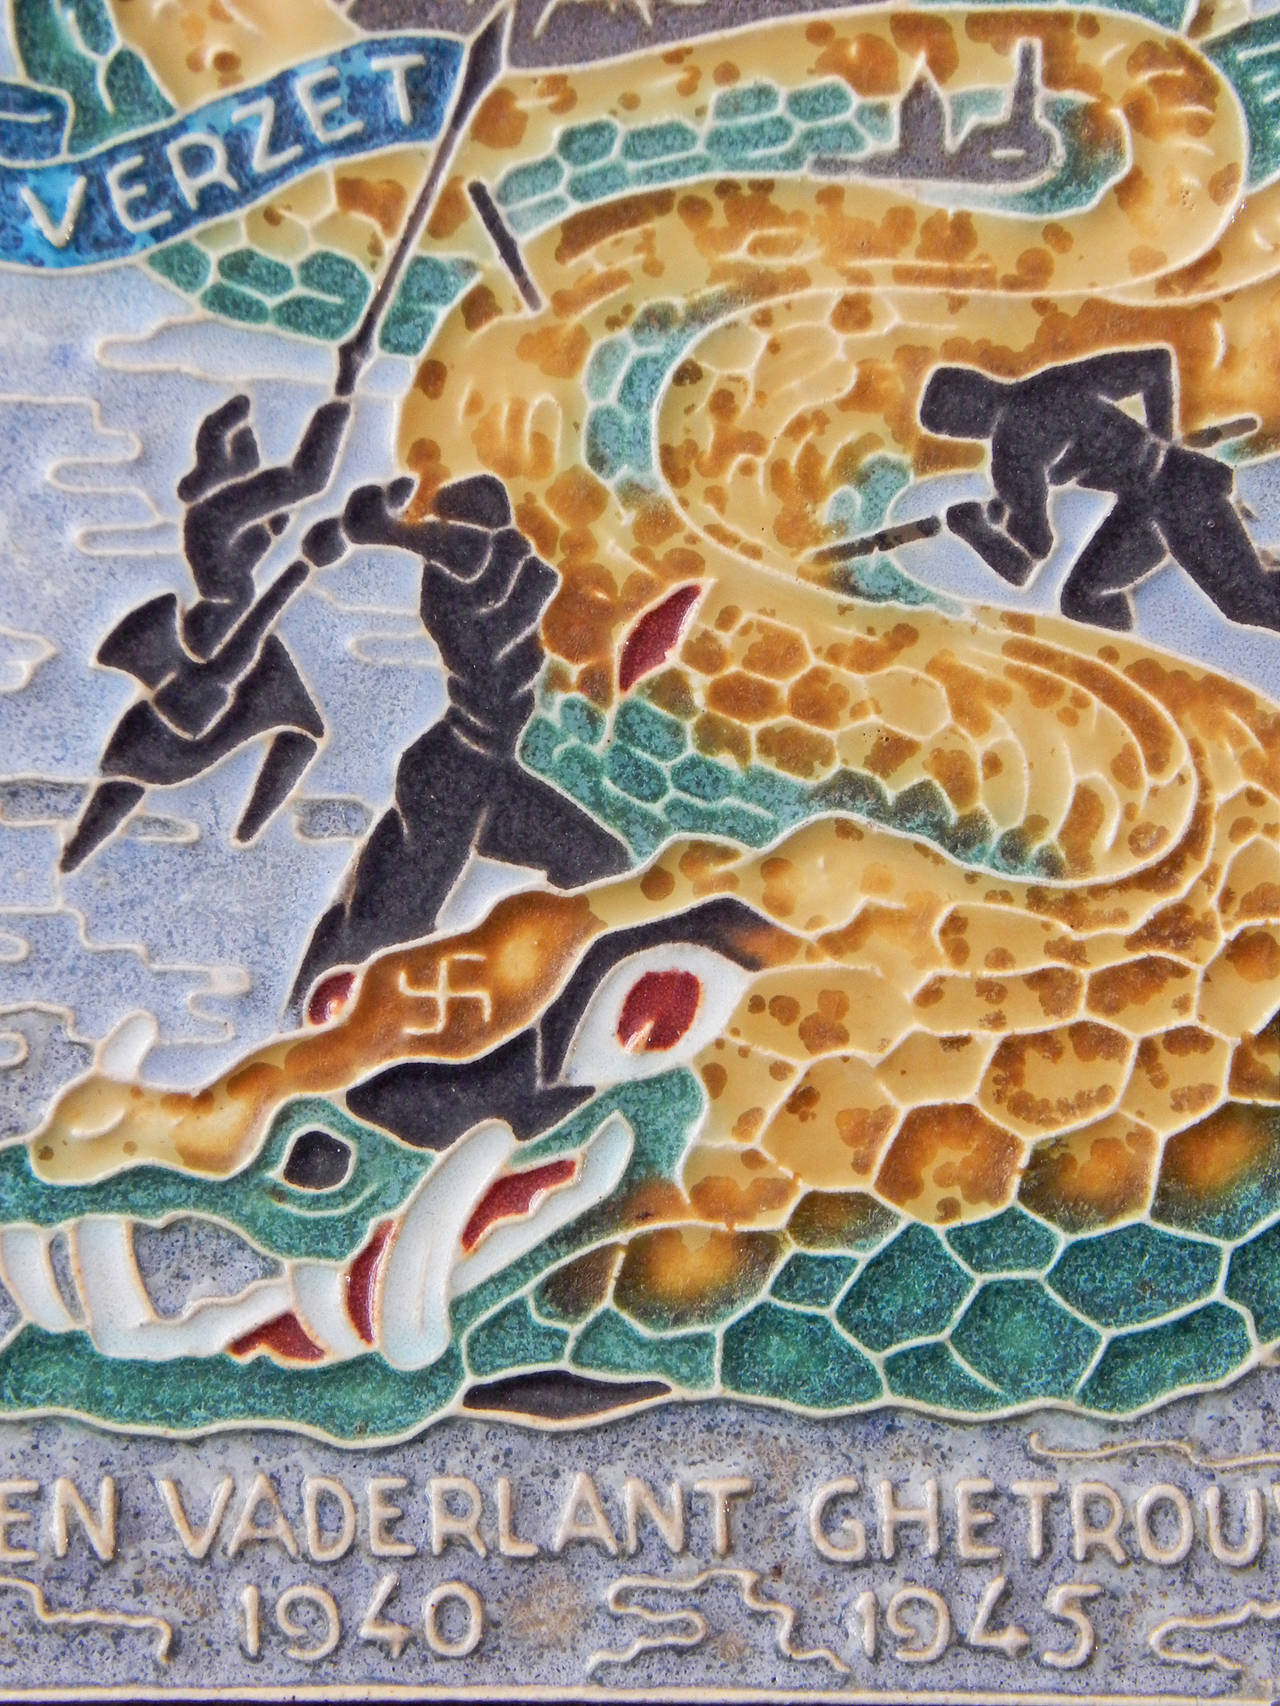 This rare and remarkable tile produced at the close of World War II in Delft, depicting the Nazi dragon being slayed by the Dutch people, is a superb example of Art Deco cloisonné tilework as well as politically-themed art. The dragon, with a